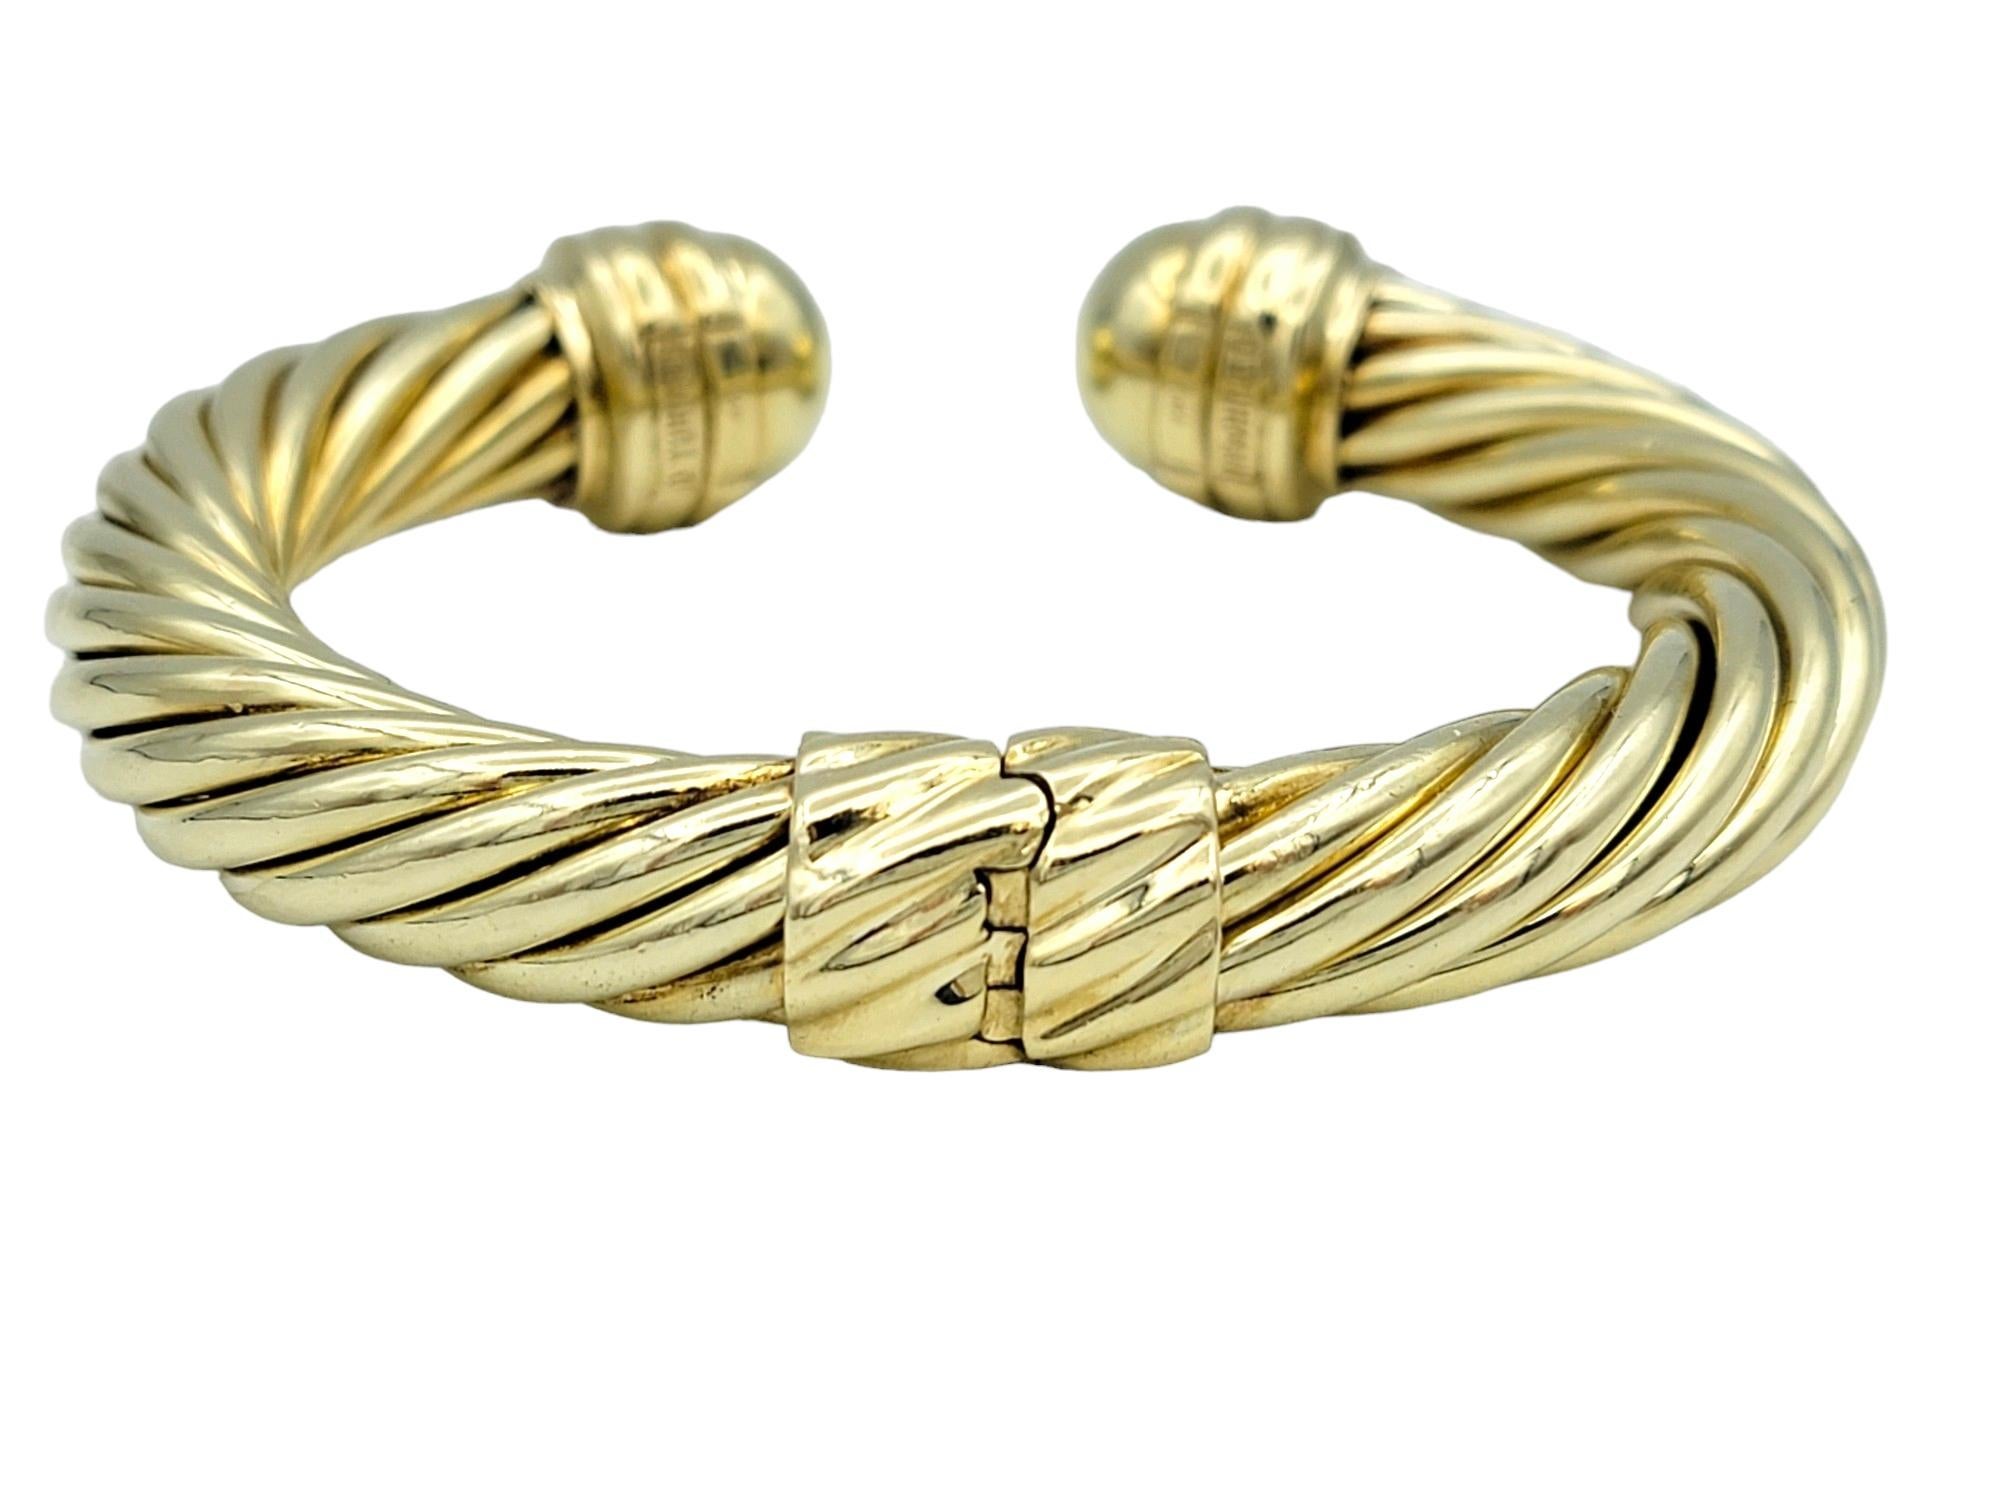 David Yurman Cable Classics 10 mm Hinged Cuff Bracelet in 14 Karat Yellow Gold In Good Condition For Sale In Scottsdale, AZ